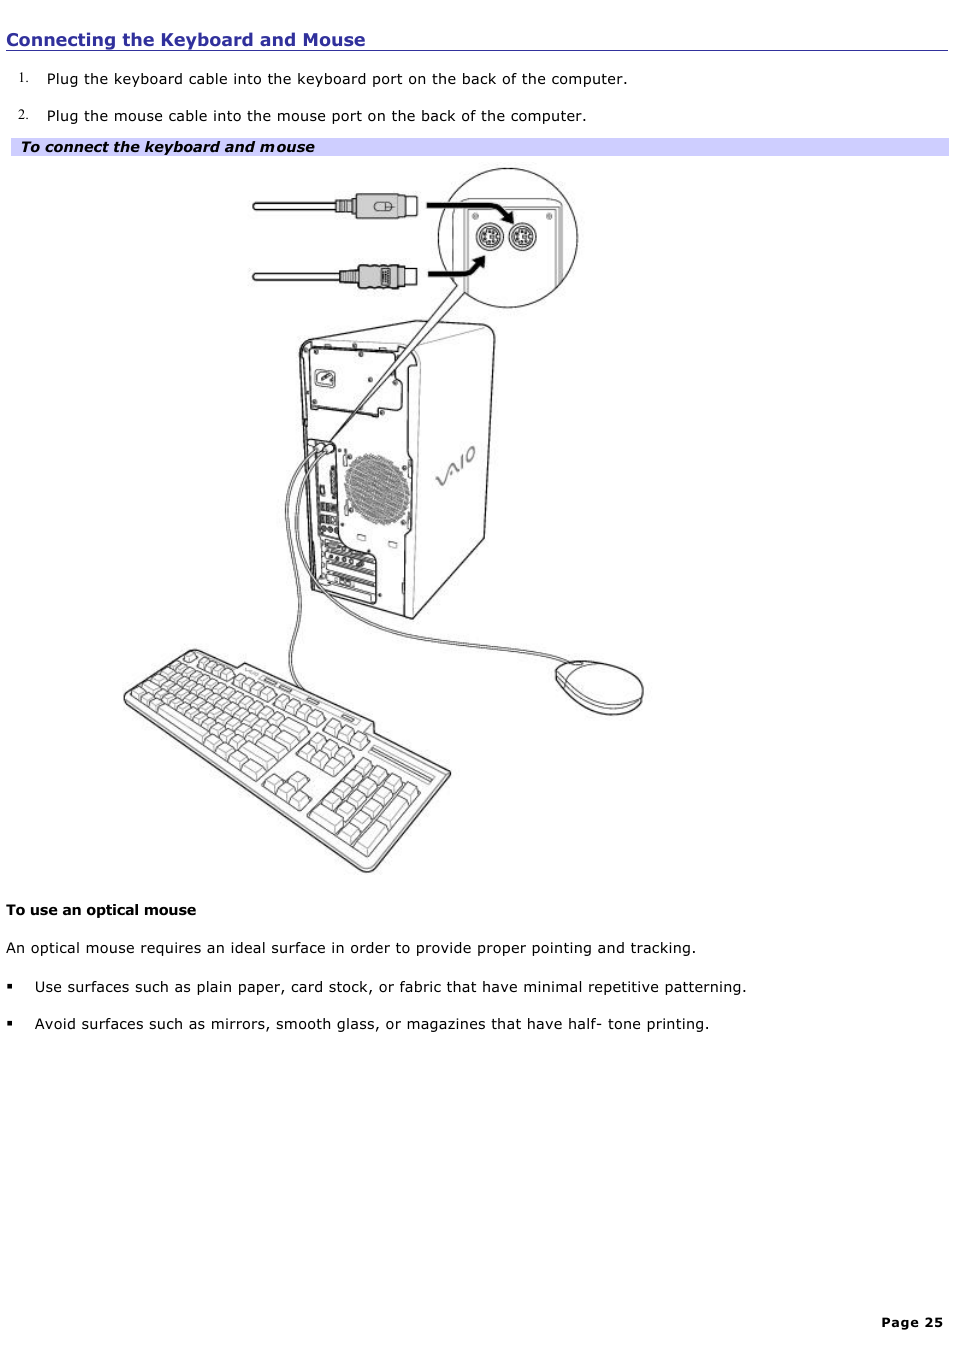 Connecting the keyboard and mouse | Sony PCV-RS411 User Manual | Page 25 / 146